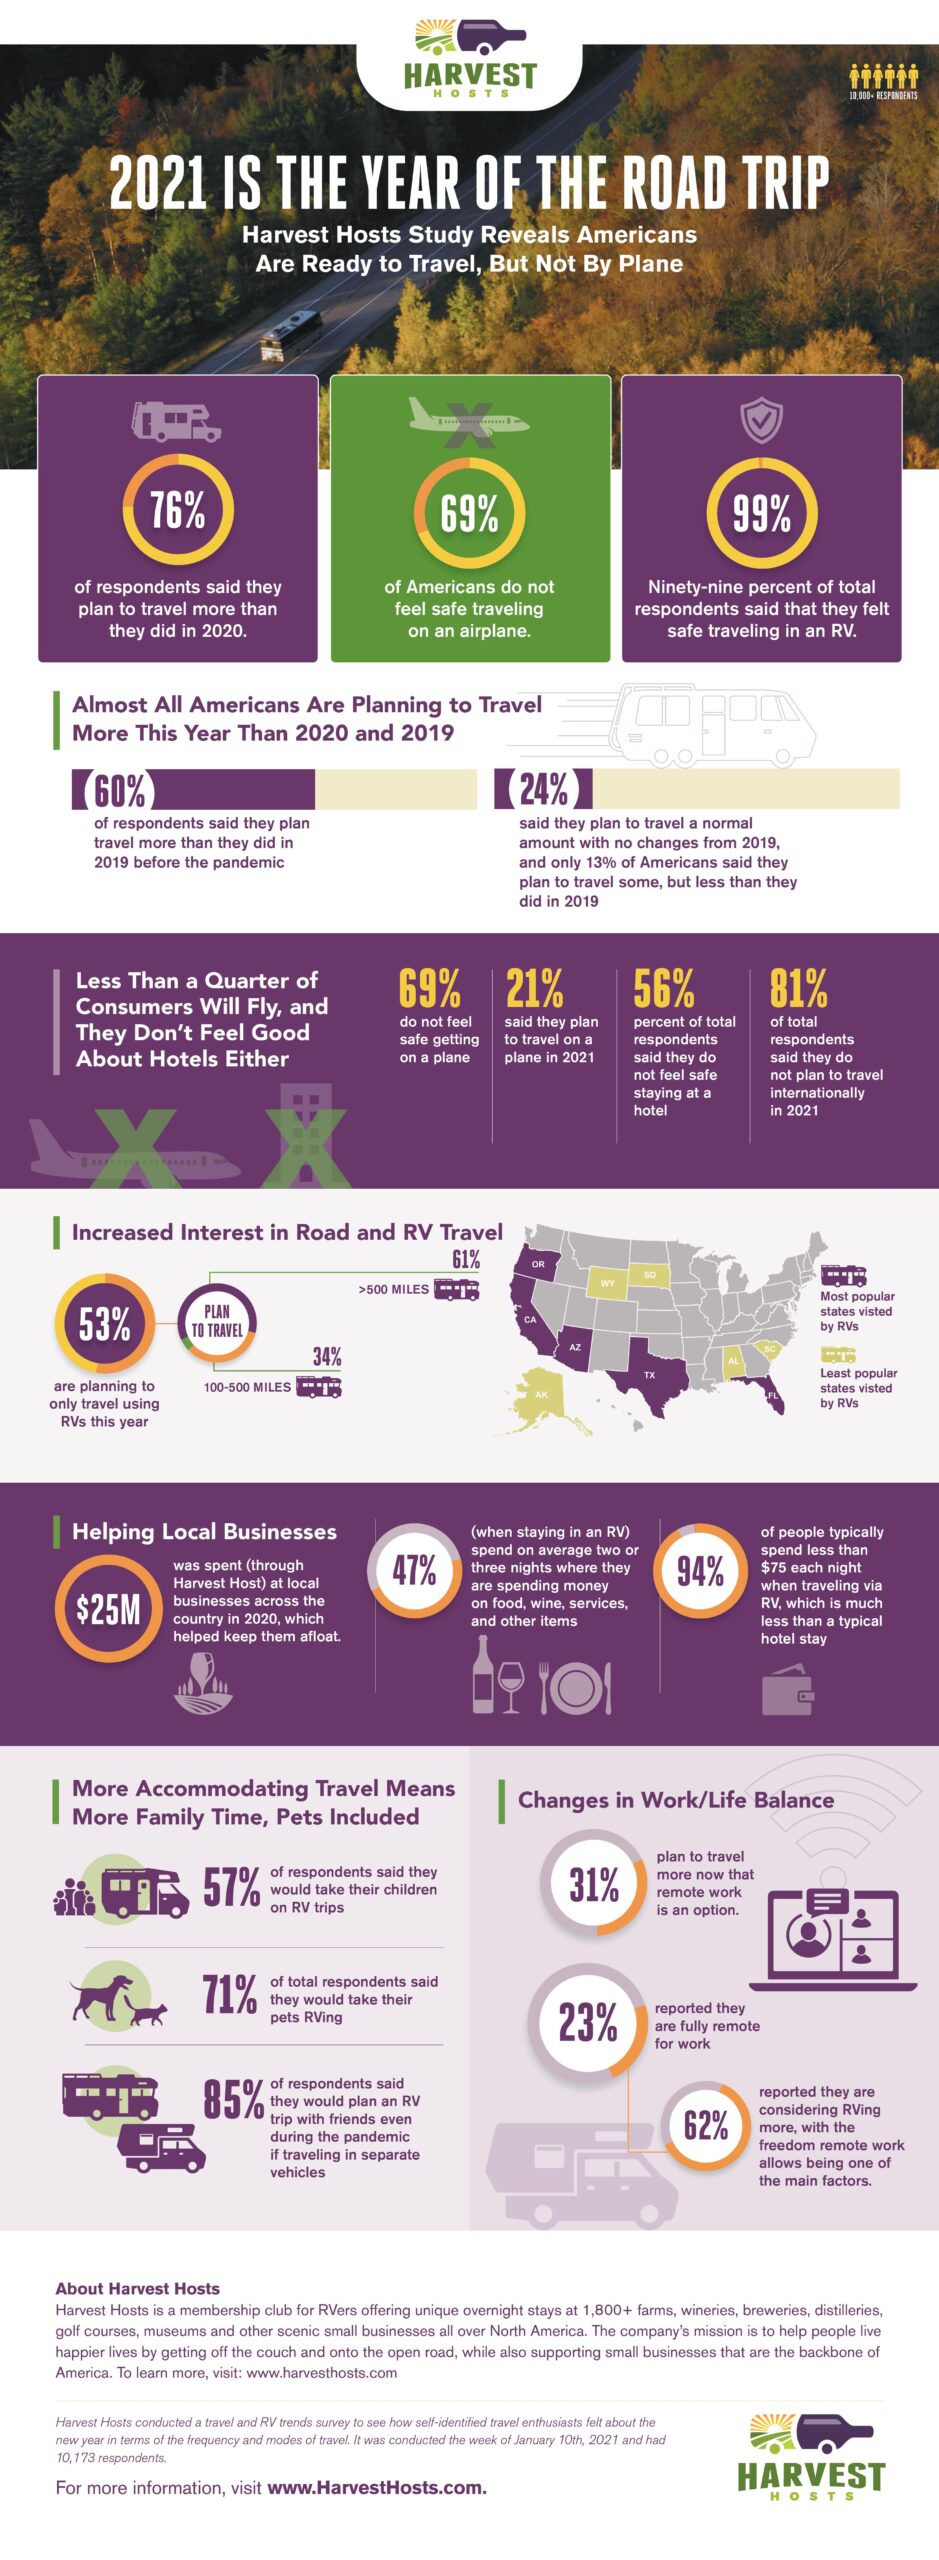 2021-The-Year-Of-The-Road-Trip-Travel-Survey-Infographic-2-scaled.jpg